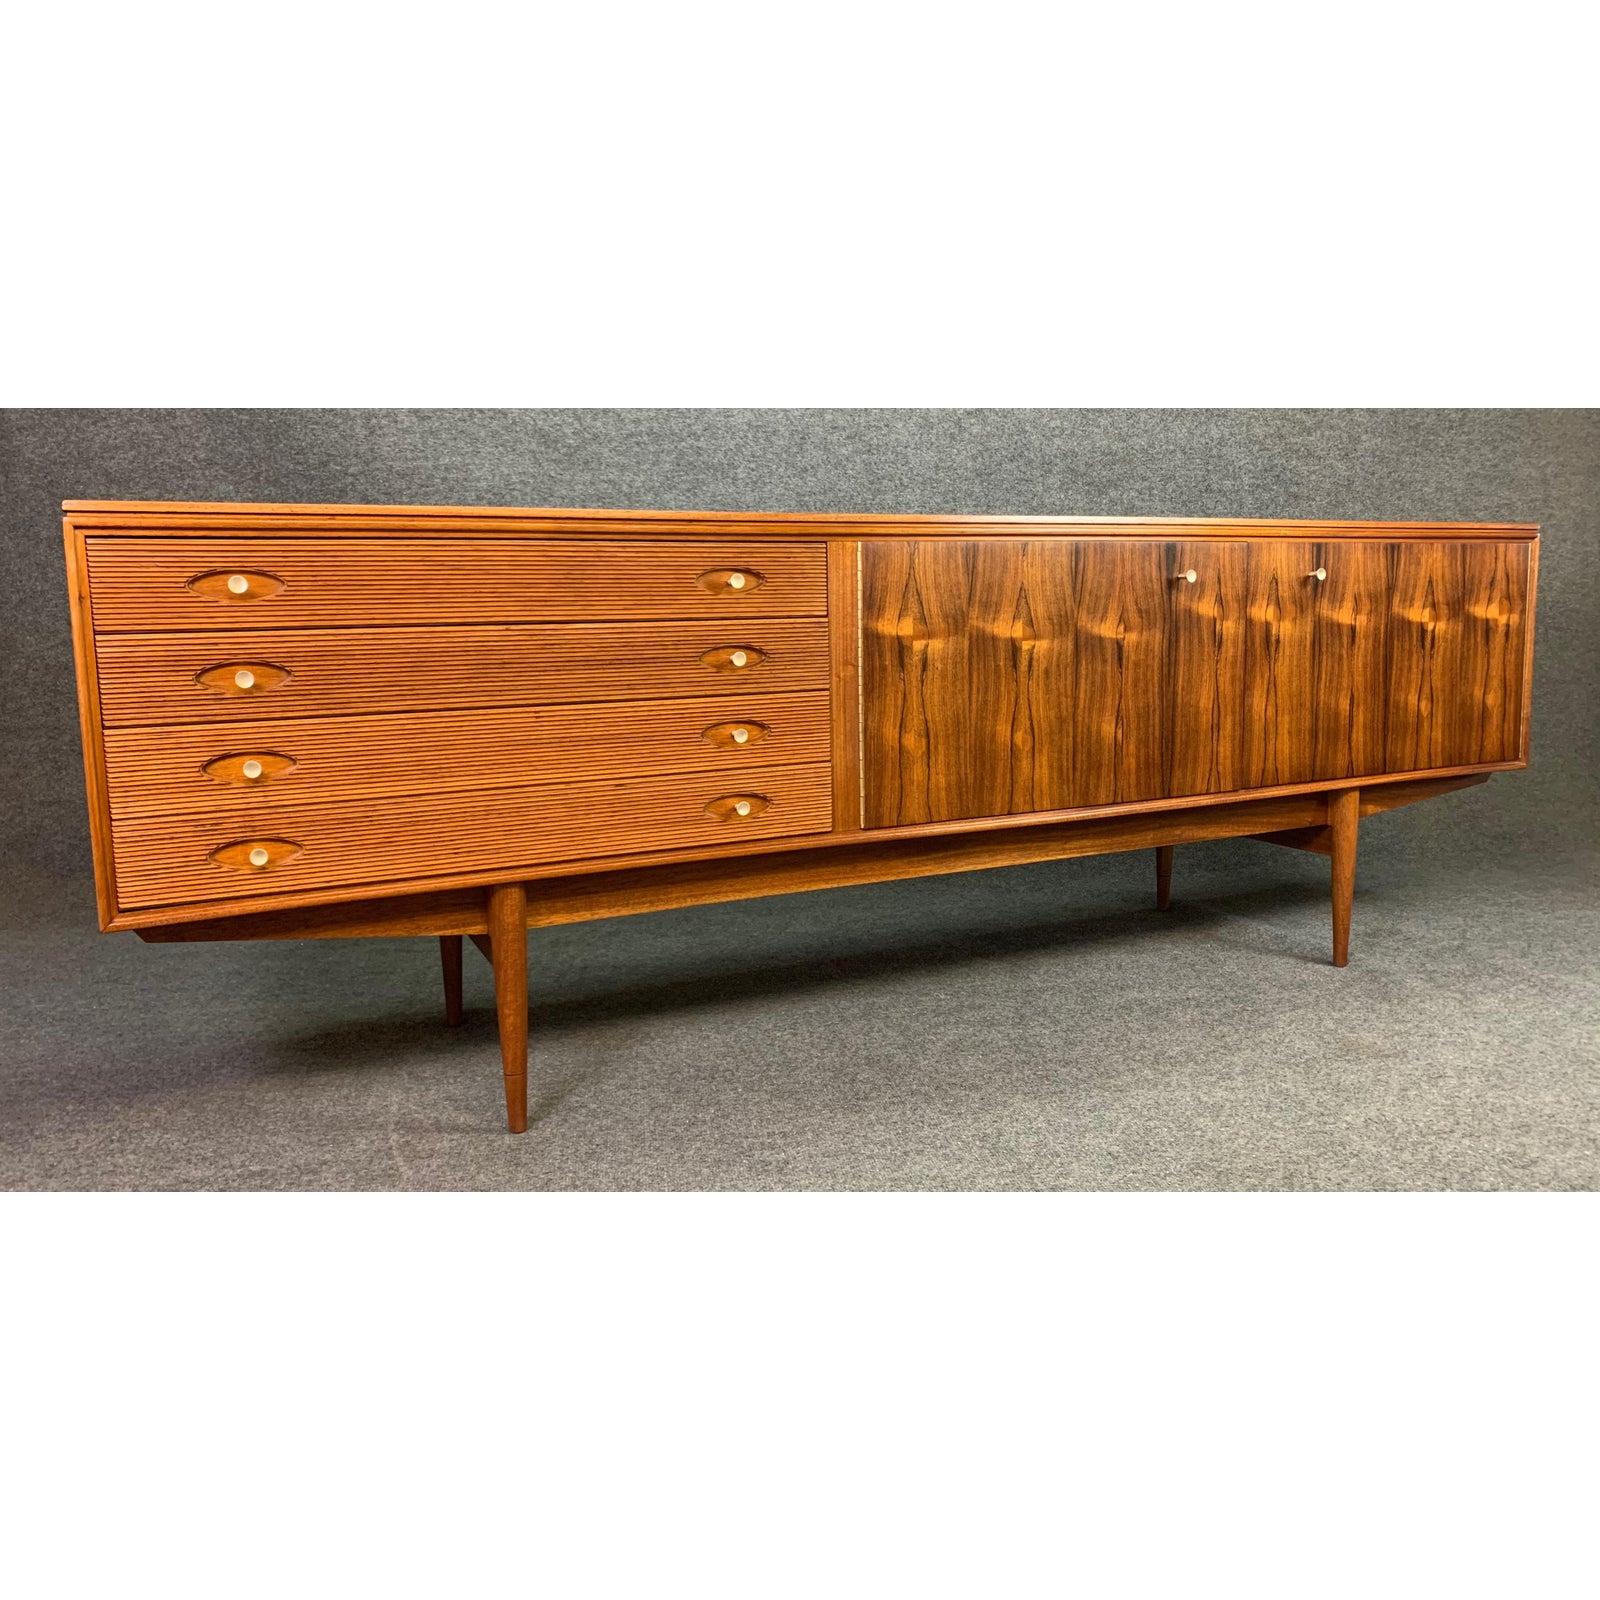 Here is an exclusive sideboard by master designer Robert Heritage manufactured by Archie Shine in UK in the 1960s.
This long sideboard, recently imported from UK to California before its restoration, features a vibrant wood grain, a raised edge on